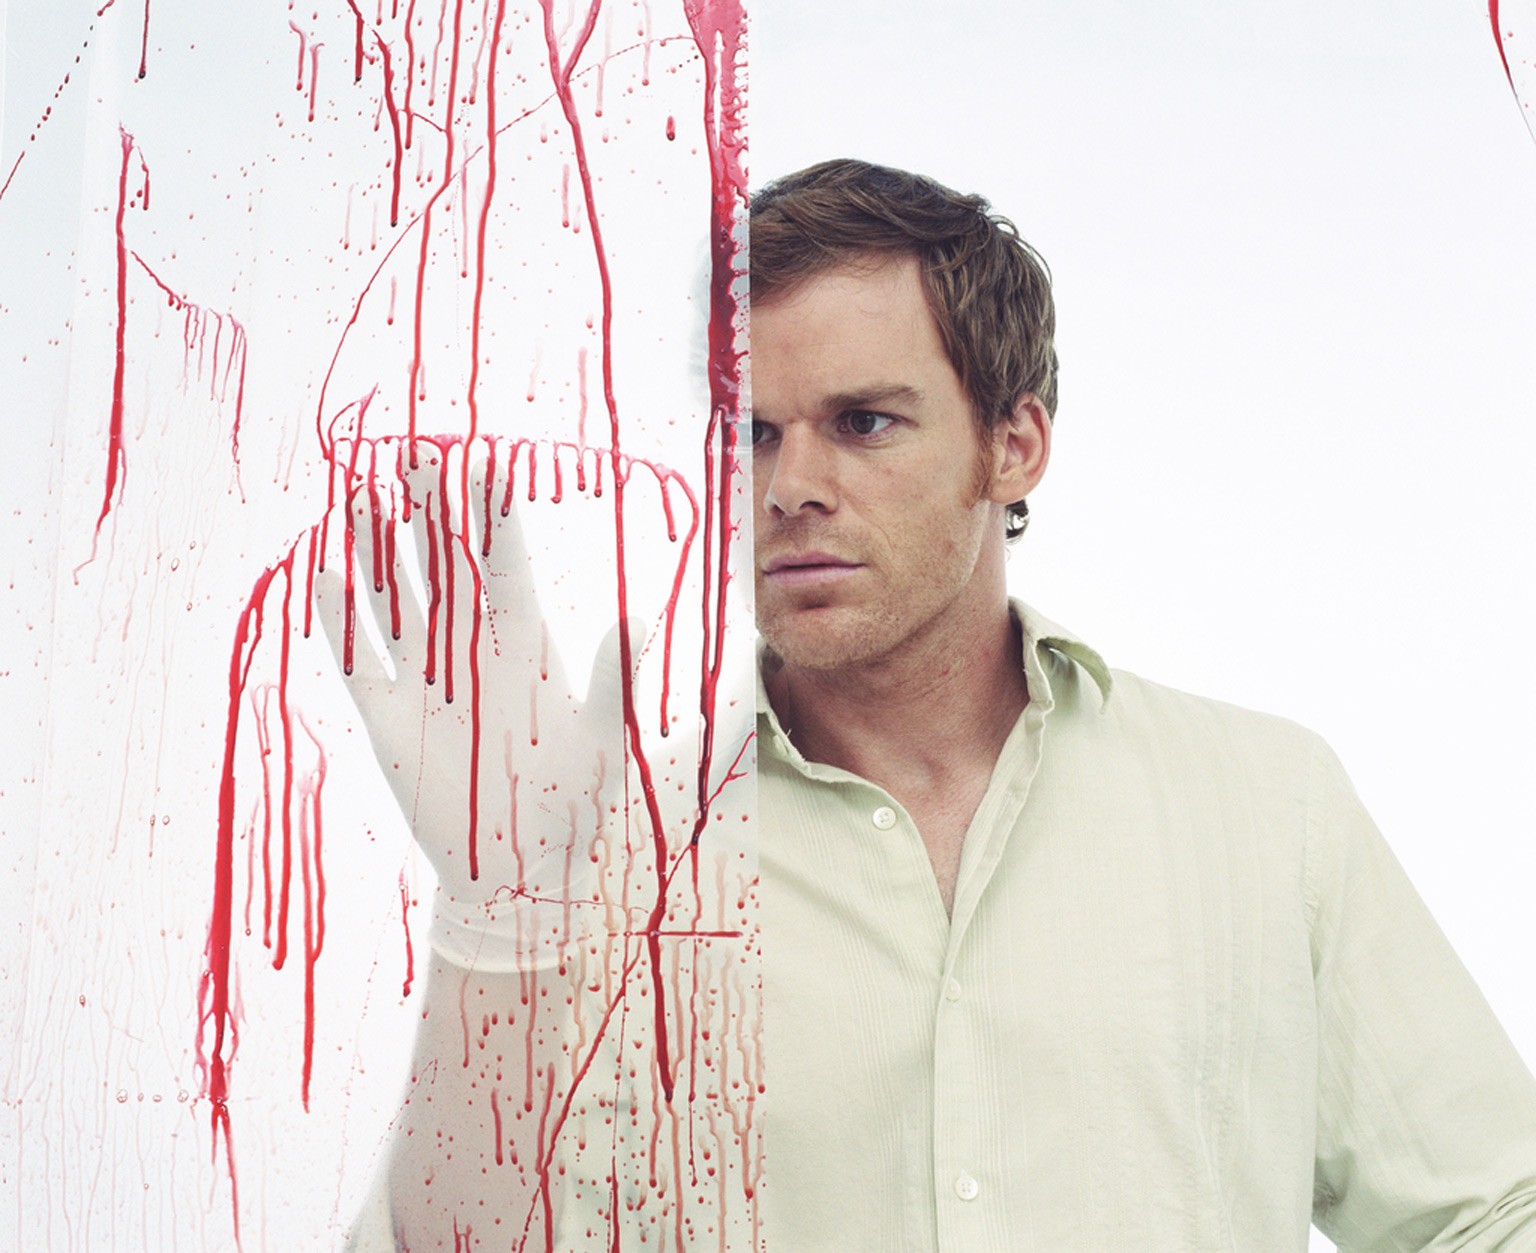 Dexter morgan hd papers and backgrounds